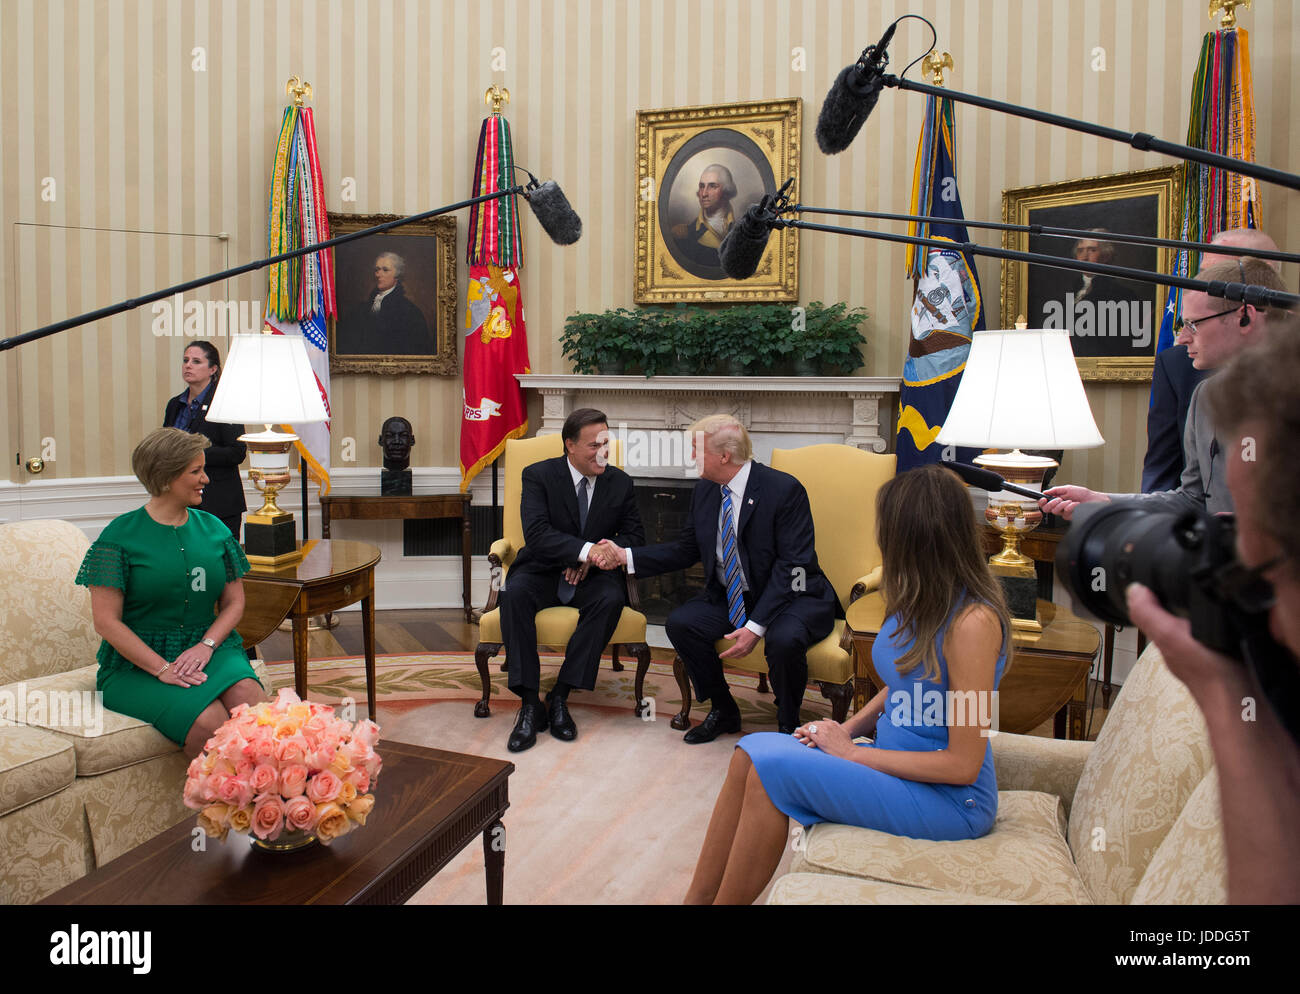 Washington DC, USA. 19th June, 2017. United States President Donald J. Trump shakes hands with President Juan Carlos Varela of Panama in the Oval Office of the White House in Washington, DC on June 19, 2017. Also seated are Lorena Castillo, left, and first lady Melanie Trump, right. Credit: Molly Riley/CNP /MediaPunch/Alamy Live News Stock Photo